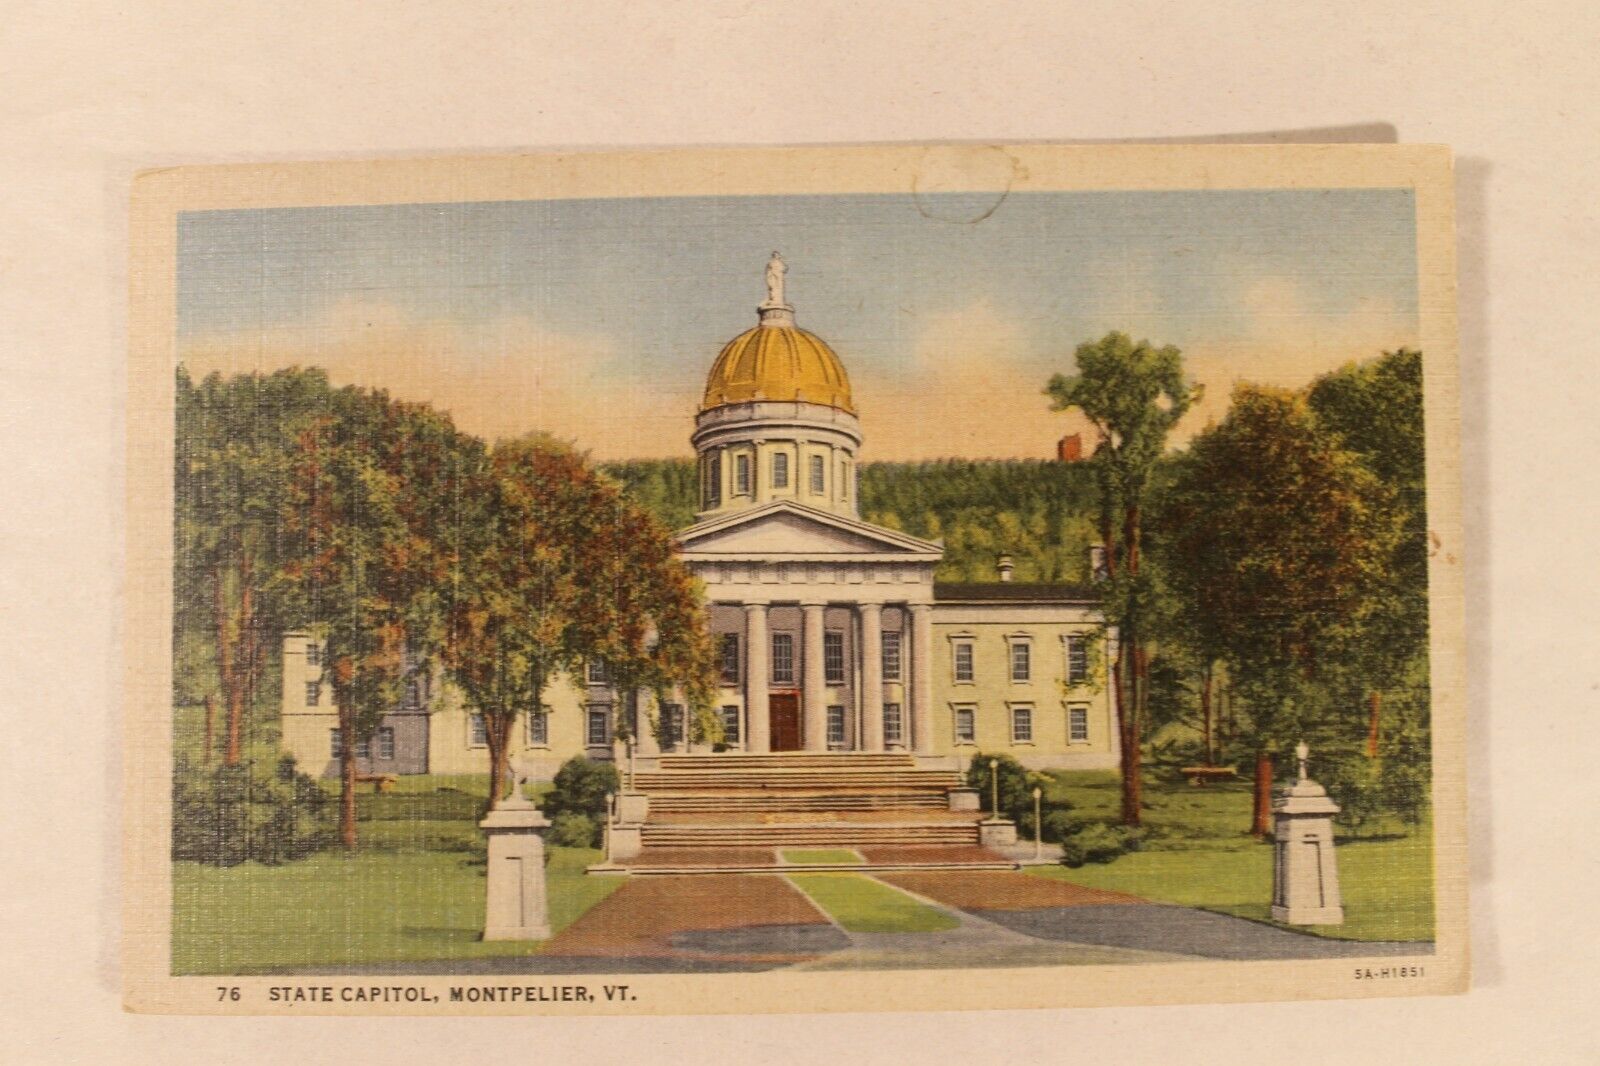 State Capital, Montpelier, VT Postcard, Unposted